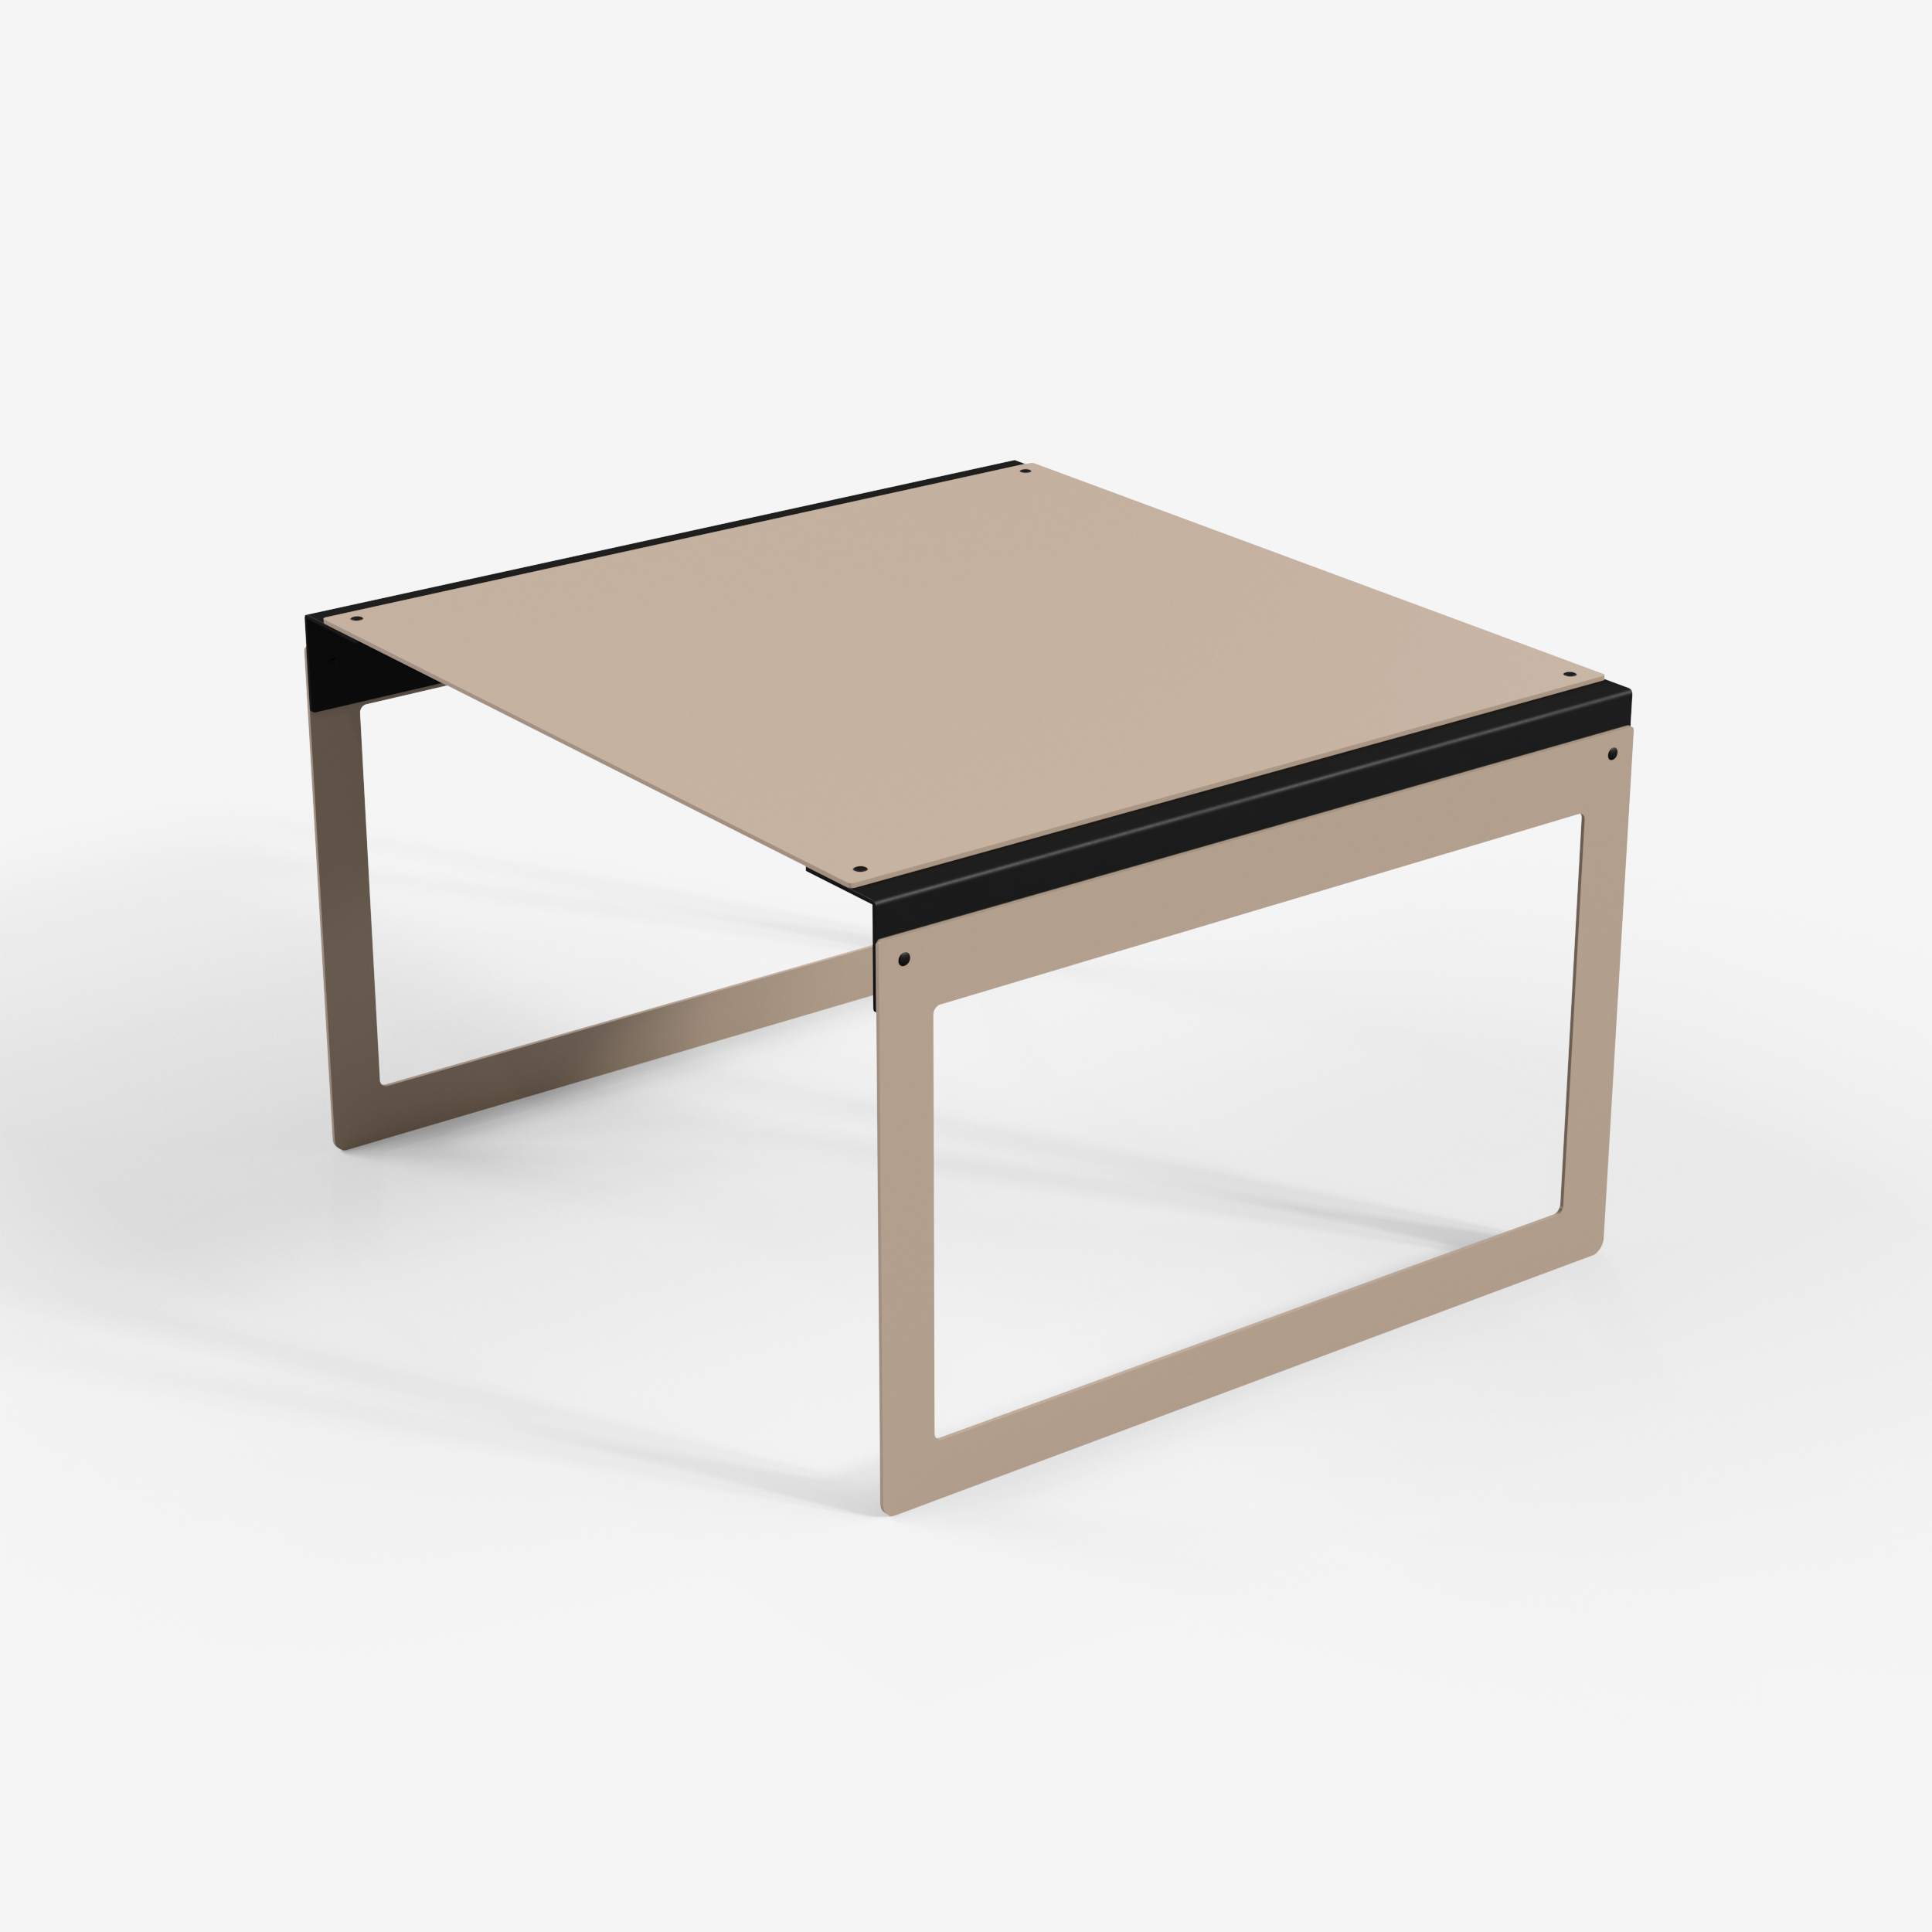 Connect - Coffee Table / XL (Frame, Beige)